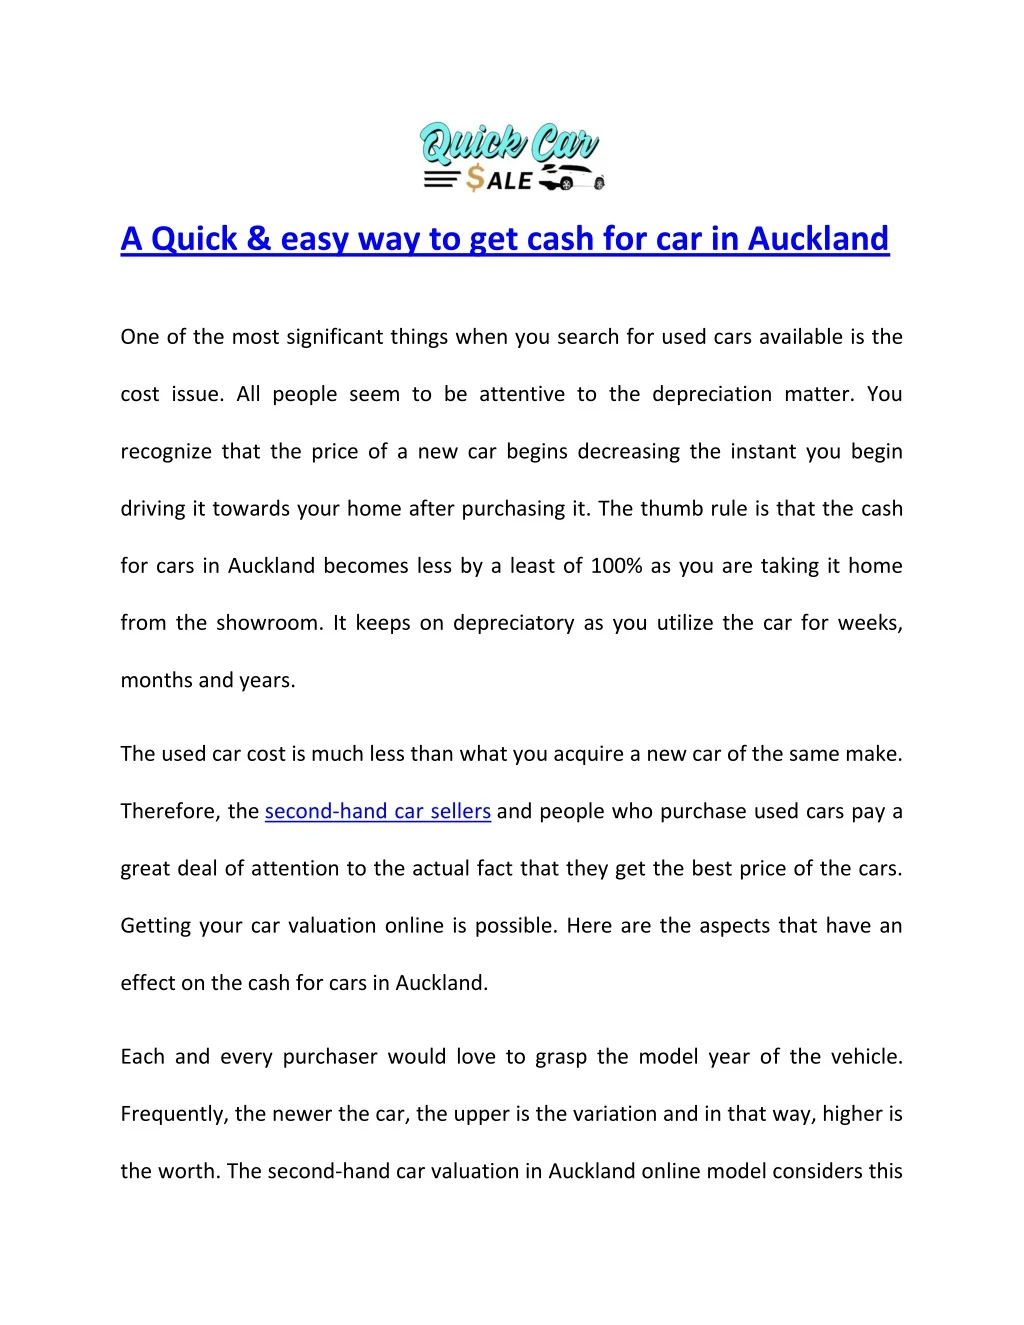 a quick easy way to get cash for car in auckland